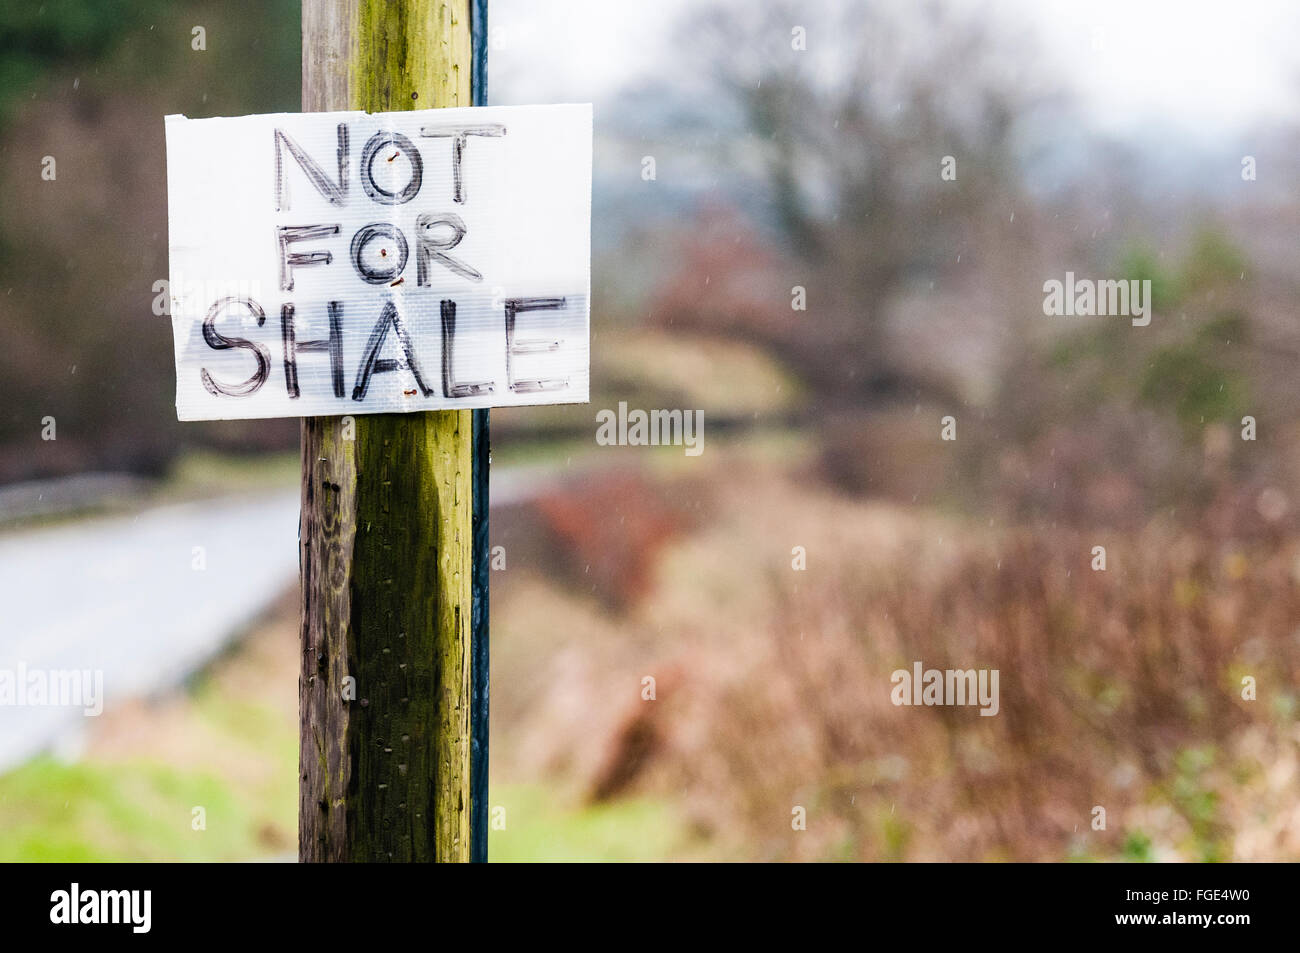 Sign nailed to a telegraph pole saying 'Not for Shale' in protest against plans to drill for oil. Stock Photo